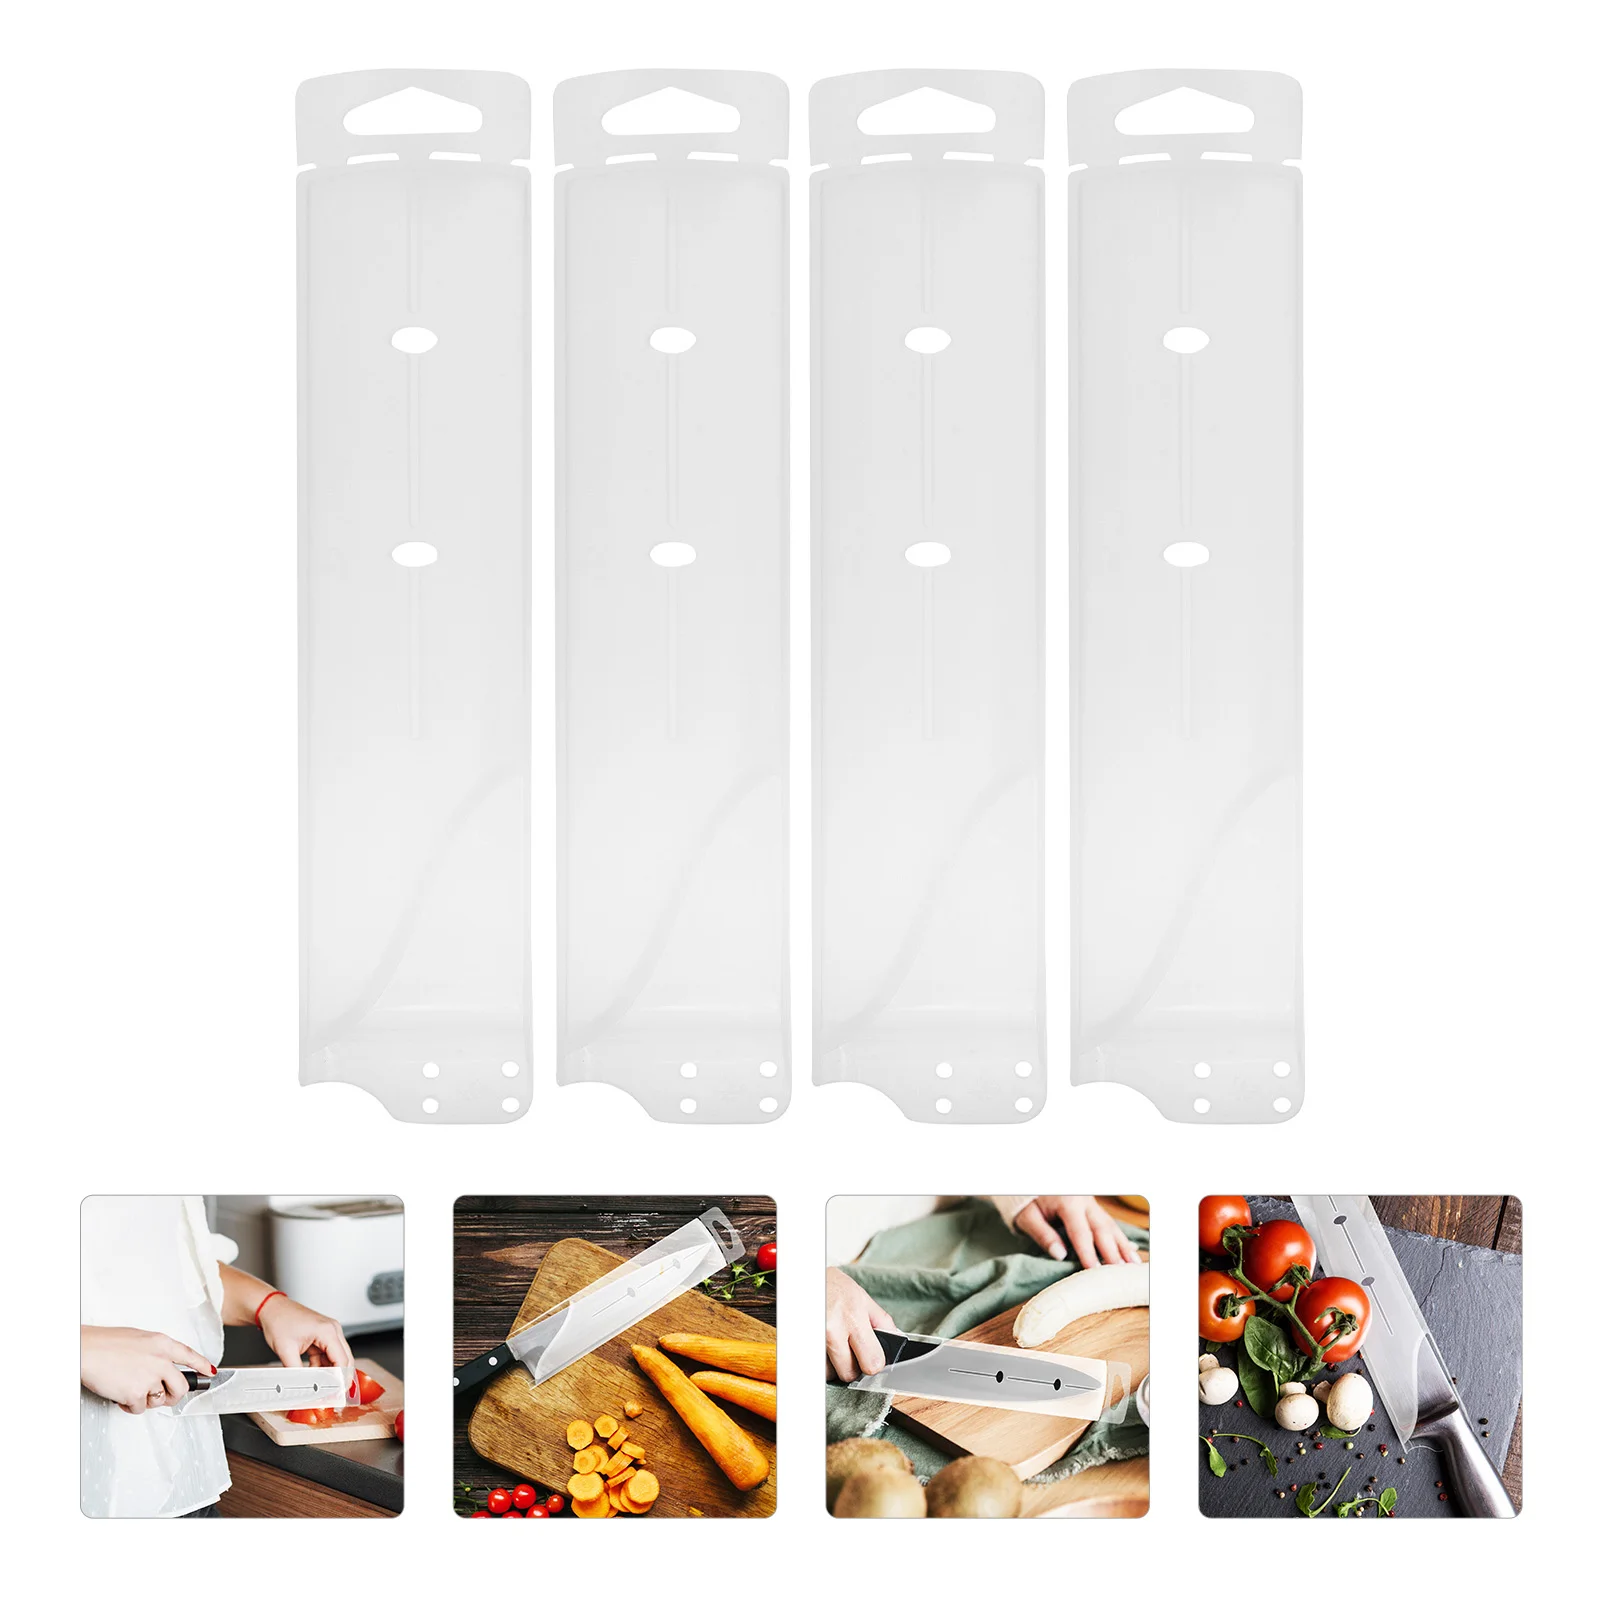 

Cutter Knives Protector Guard Sheath Guards Sleeves Cover Sleeve Chef Case Cutters Blades Bag Covers Cutlery Kitchen Universal